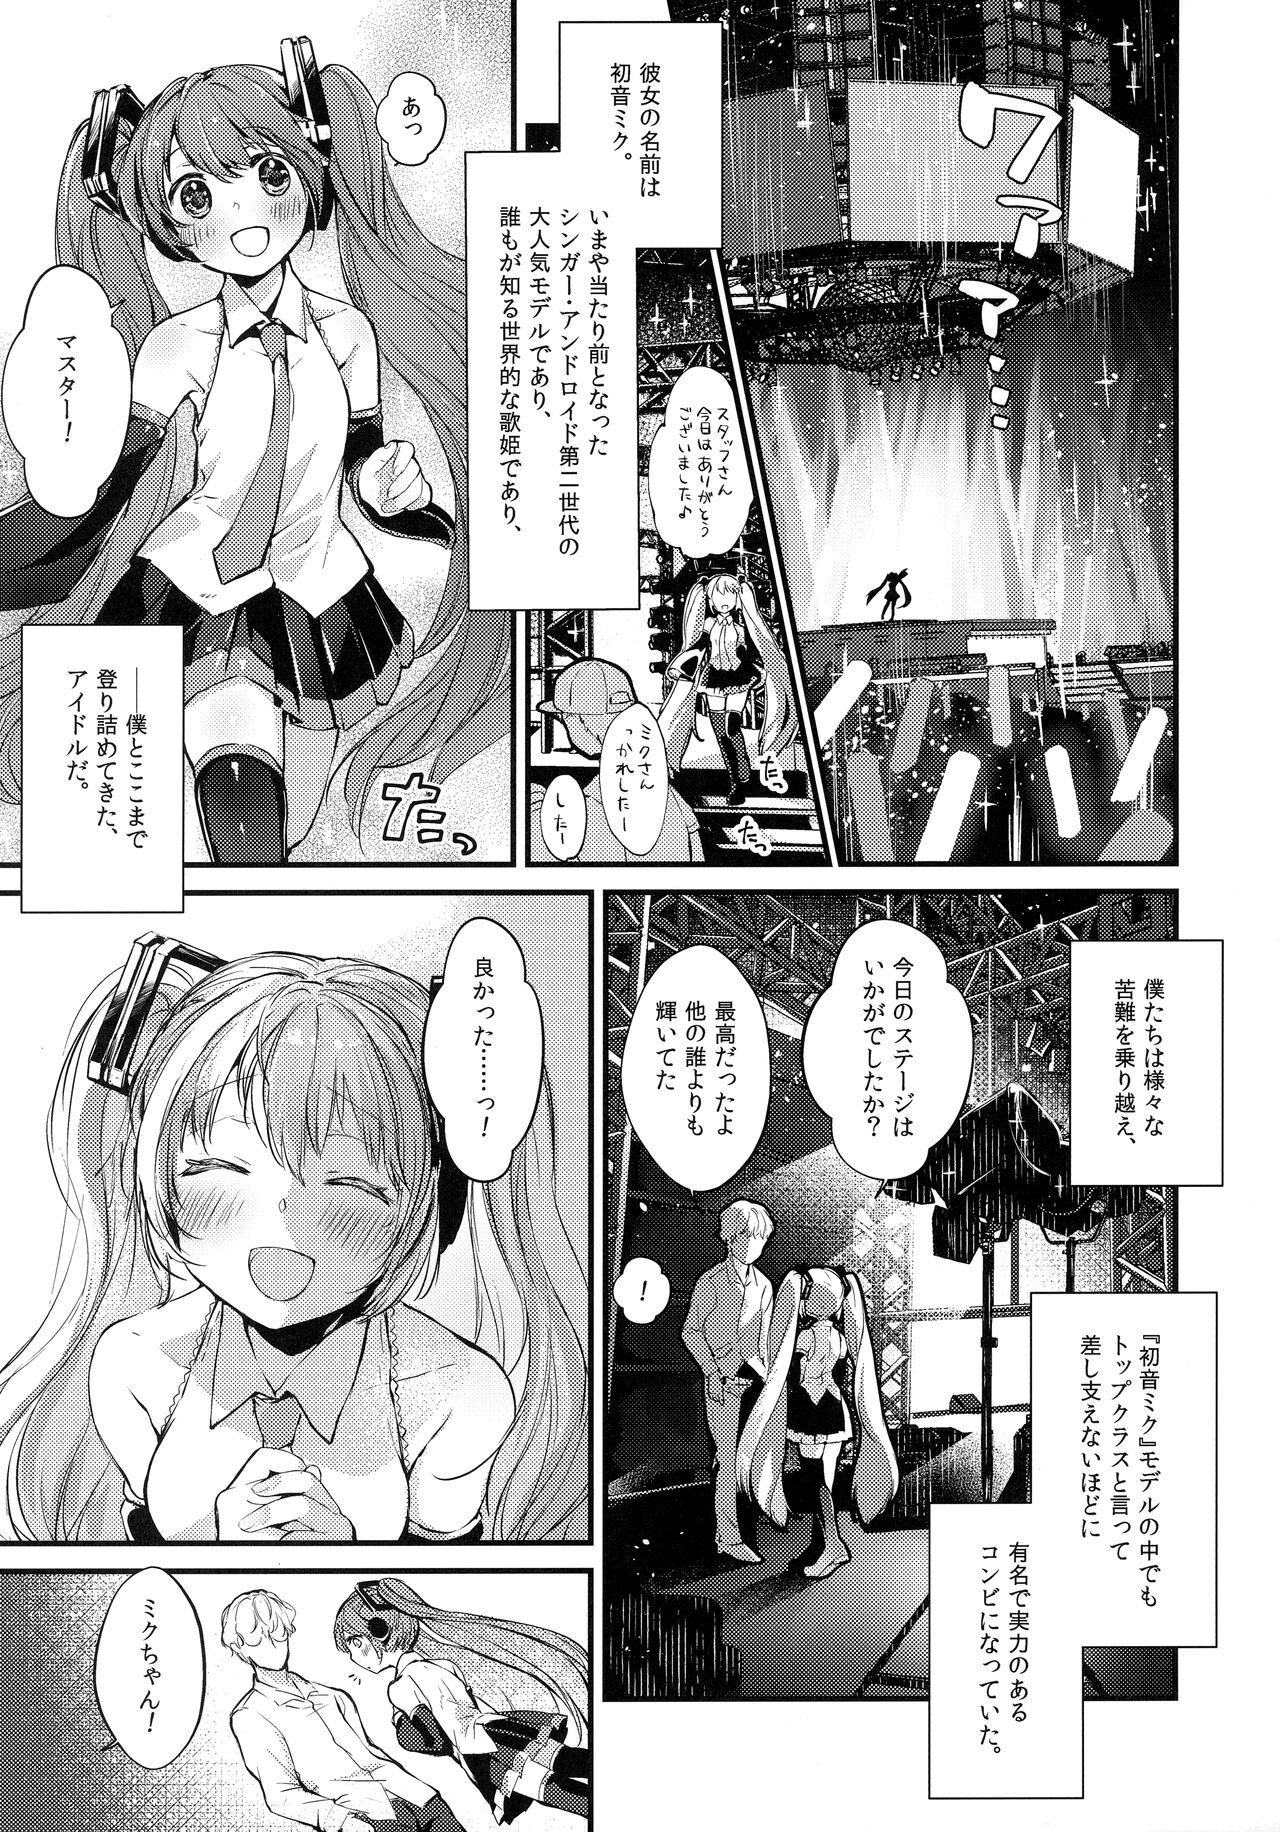 Erotic LOVEROID - Vocaloid Smooth - Page 4